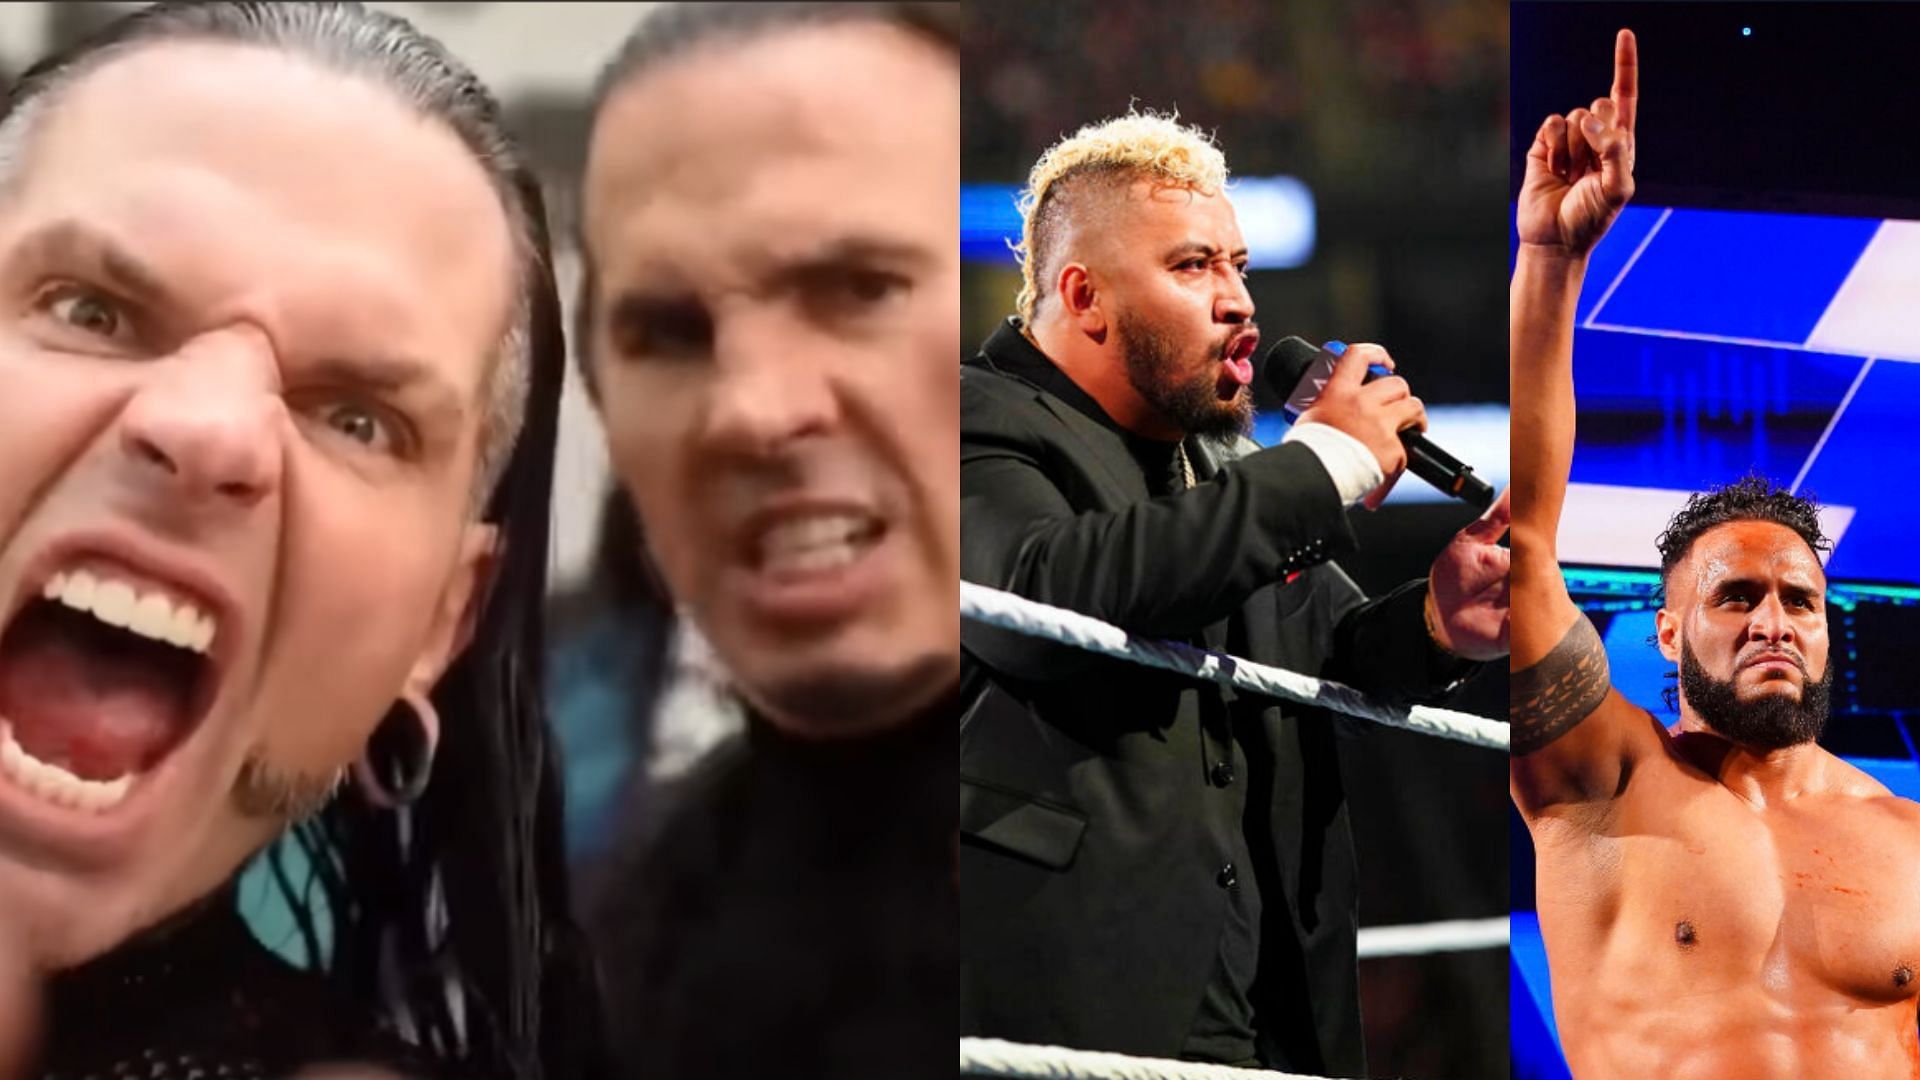 The Hardys are legends in tag team wrestling [Image Credits: AEW